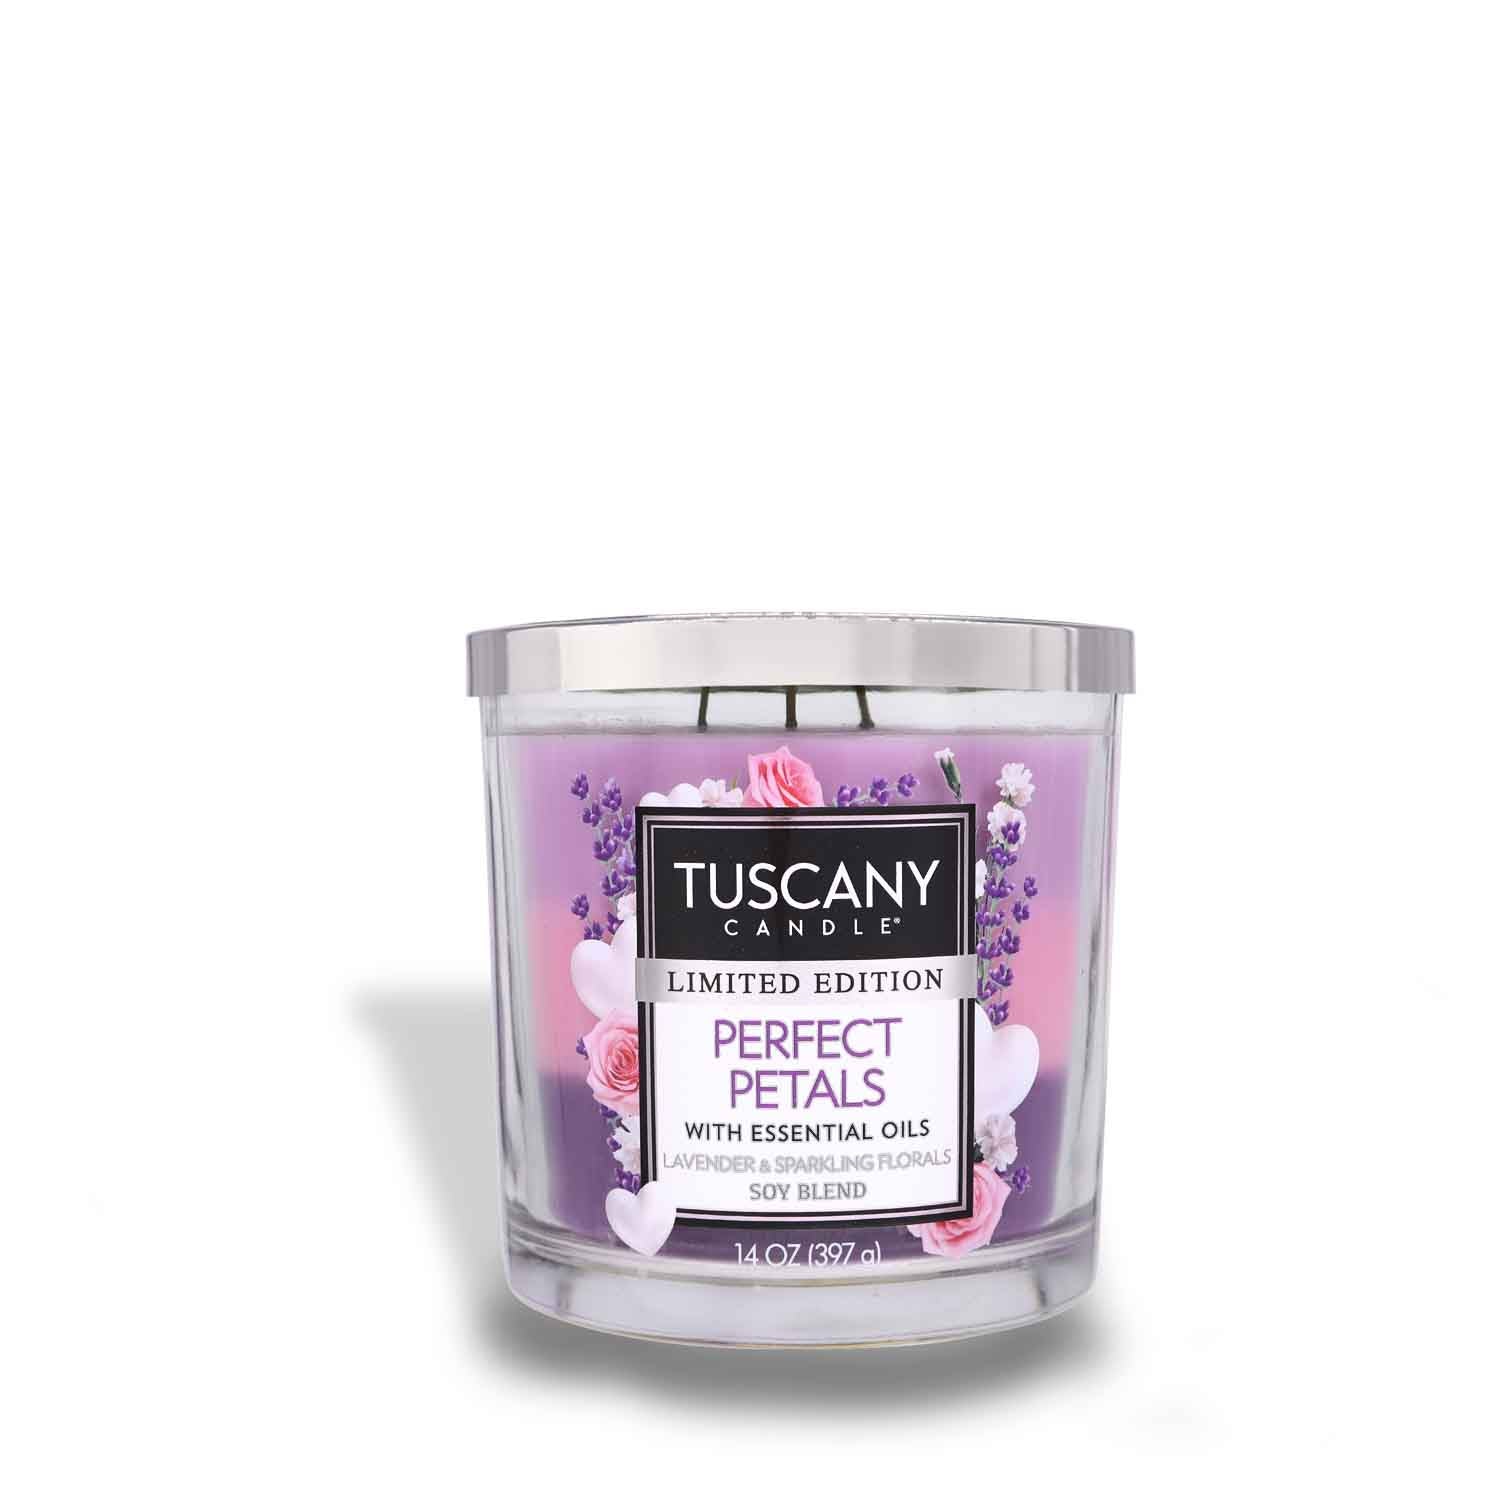 A Perfect Petals Long-Lasting Scented Jar Candle (14 oz) by Tuscany Candle® with a lovely Tuscany fragrance.